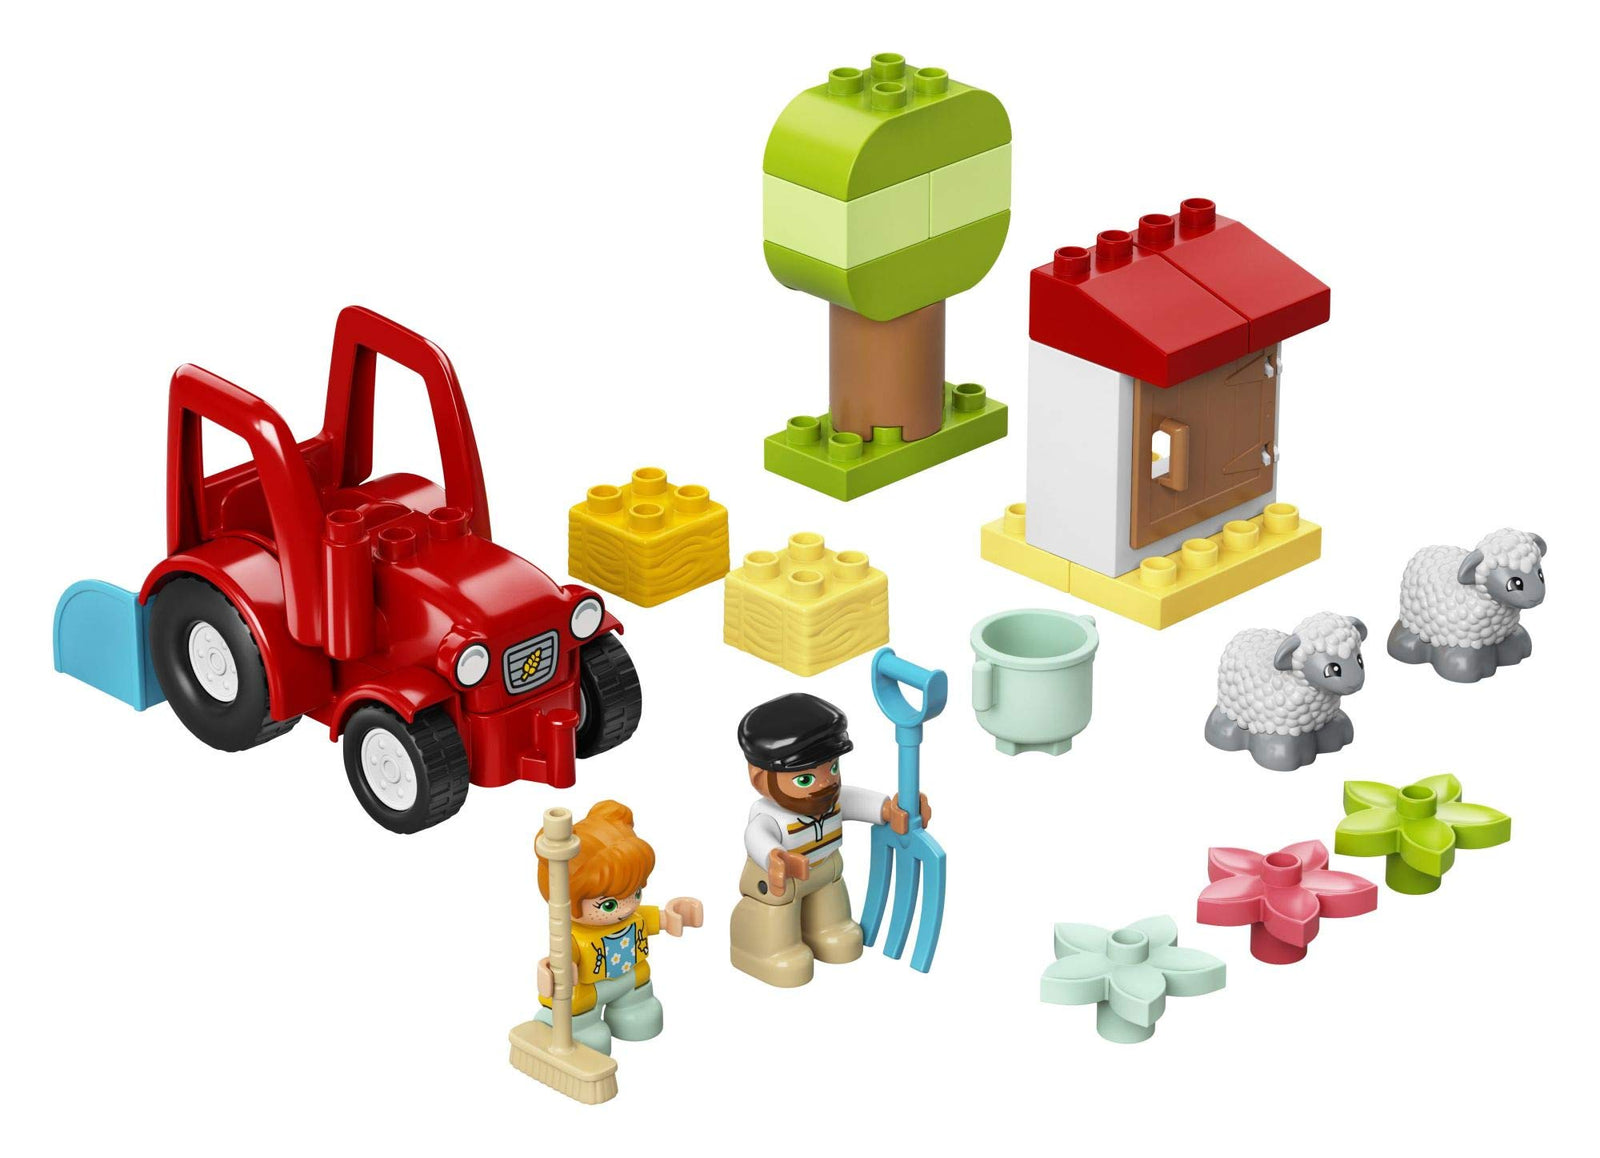 LEGO DUPLO Town Farm Tractor & Animal Care 10950 Creative Playset for Toddlers with a Toy Tractor and 2 Sheep, New 2021 (27 Pieces)